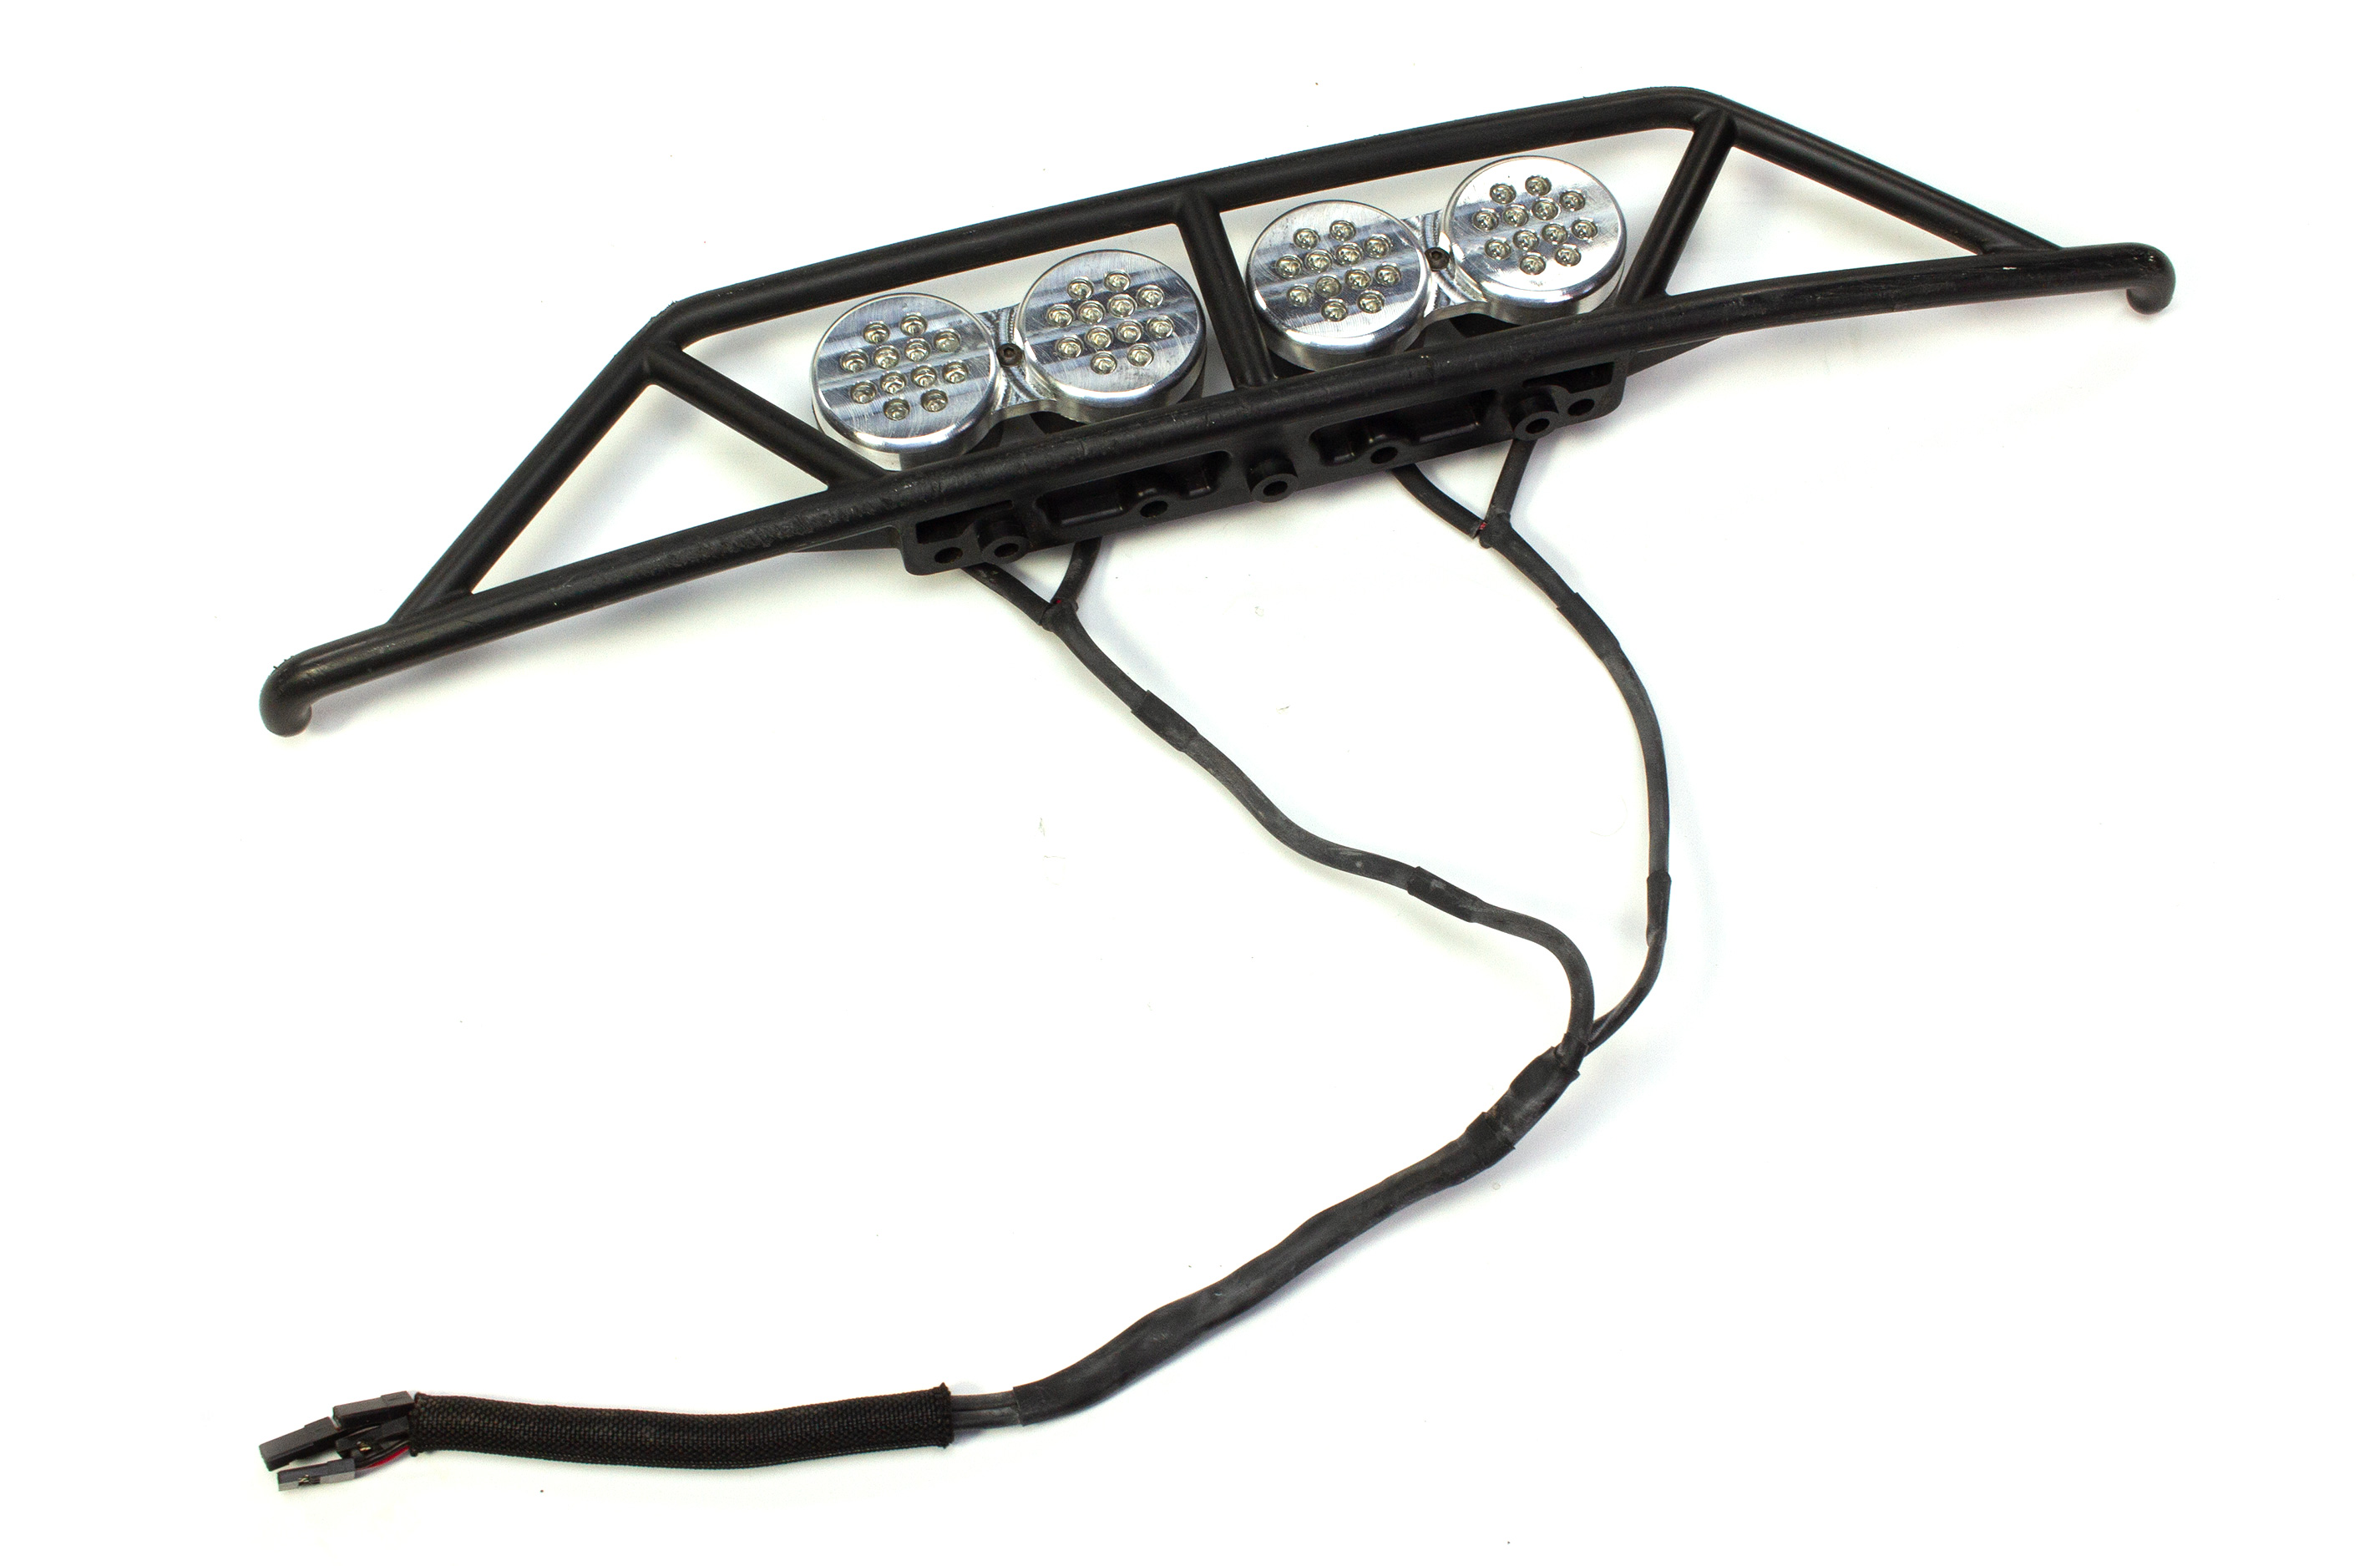 Losi 5ive-T front lighting, used with front bumper